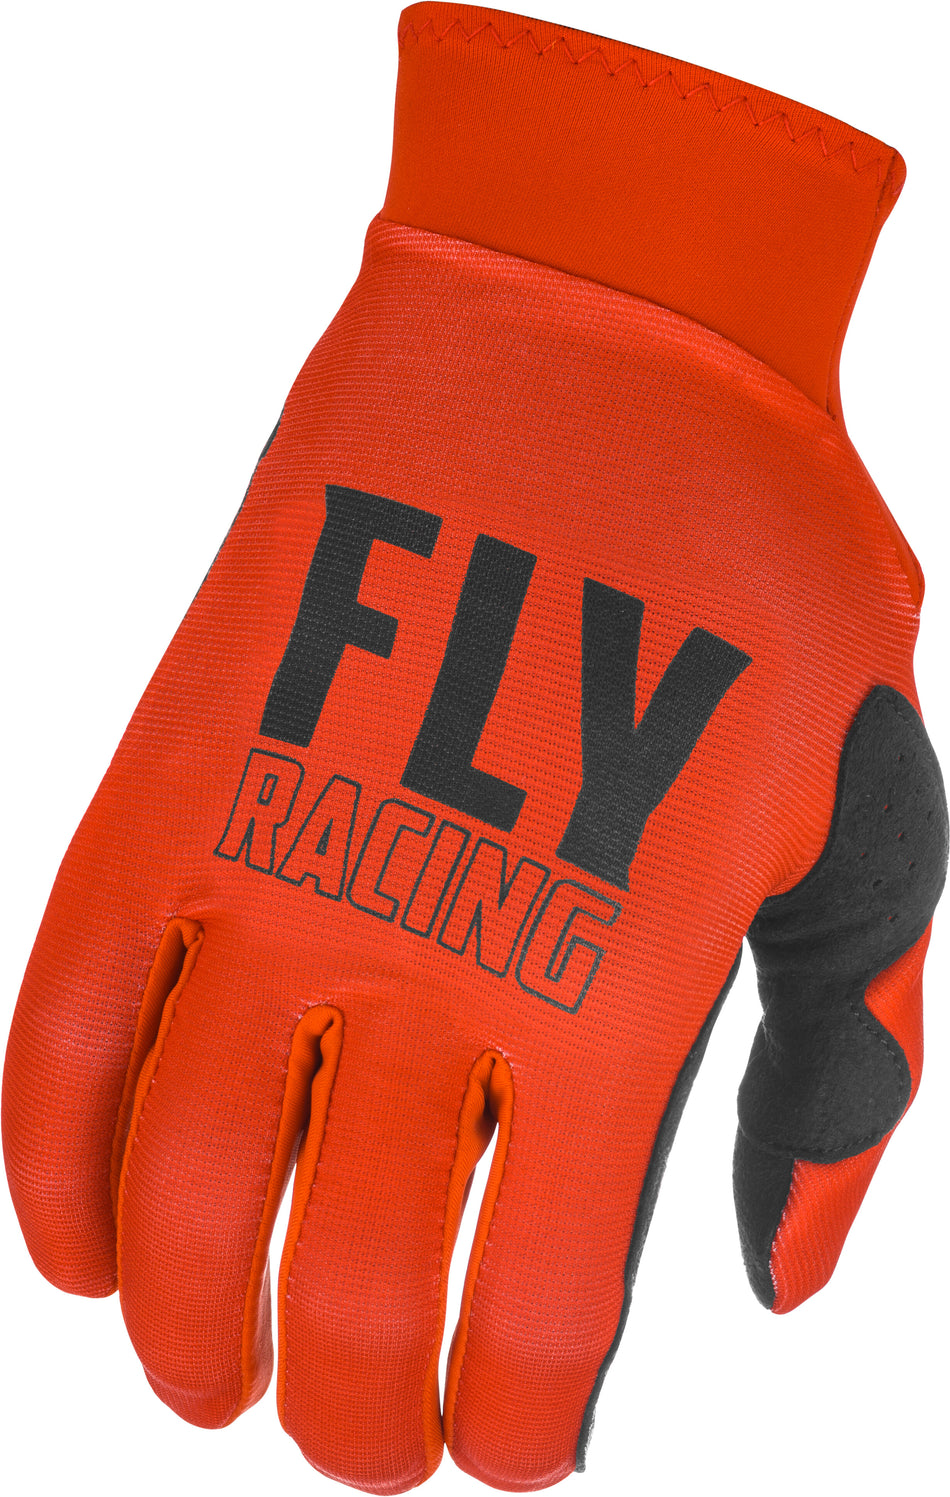 FLY RACING Pro Lite Gloves Red/Black 2x 374-8522X